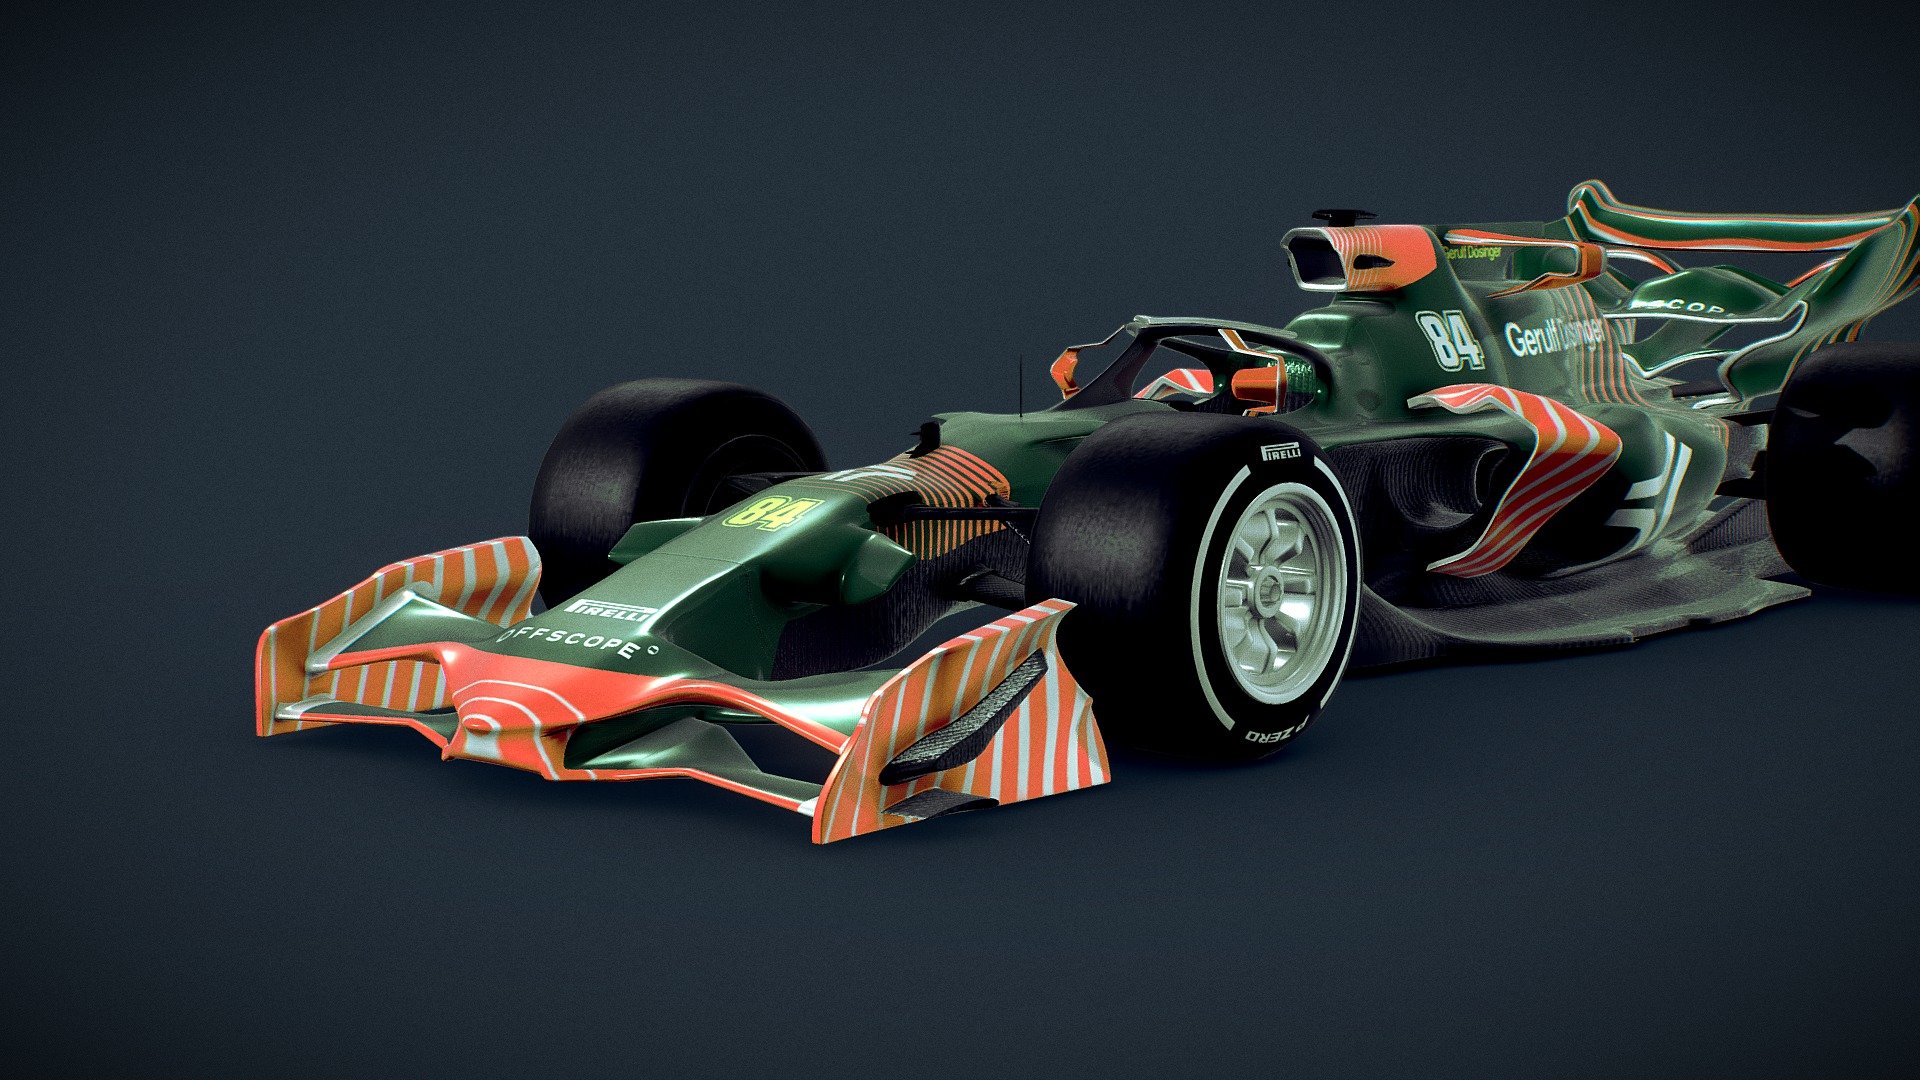 This concept incorporates all that I love about Formula 1 cars. A muscular chassis, bold apperance and a lot of features that cater to my personal taste. The concept incorporates parts of the 2007/08 cars aesthetics while its proportions are oriented along the lines of the cars from 2017 onwards. The cars front is slightly exaggerated to pull visual focus towards the bulky forms. Wings and winglets across the chassis have a modern, almost futuristic, form-language.

The concept itself was spatially sketched with Blenders amazing Grease-Pencil. The modeling was also done in Blender &ldquo;atop